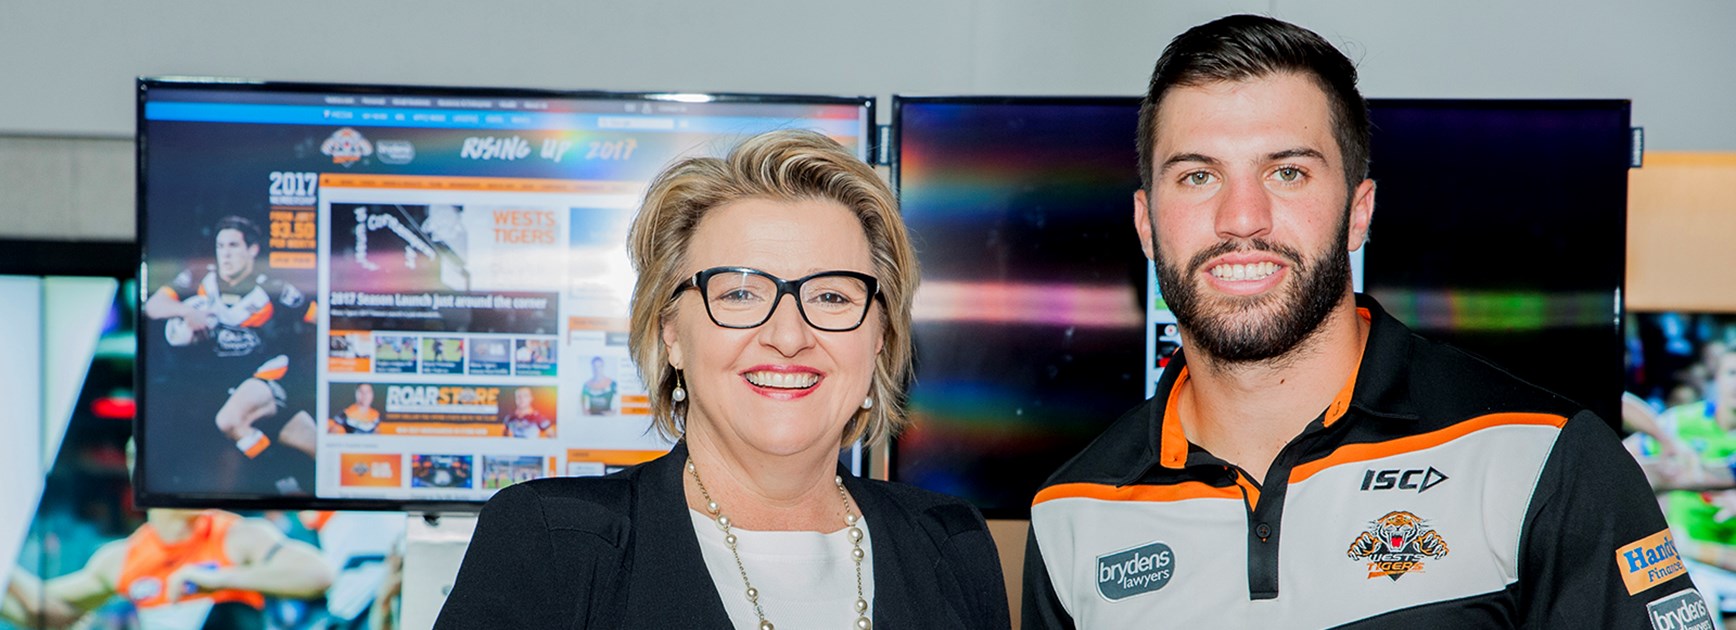 Michele Garra, Executive Director Telstra Media, with Wests Tigers fullback James Tedesco at the Telstra sports app launch.